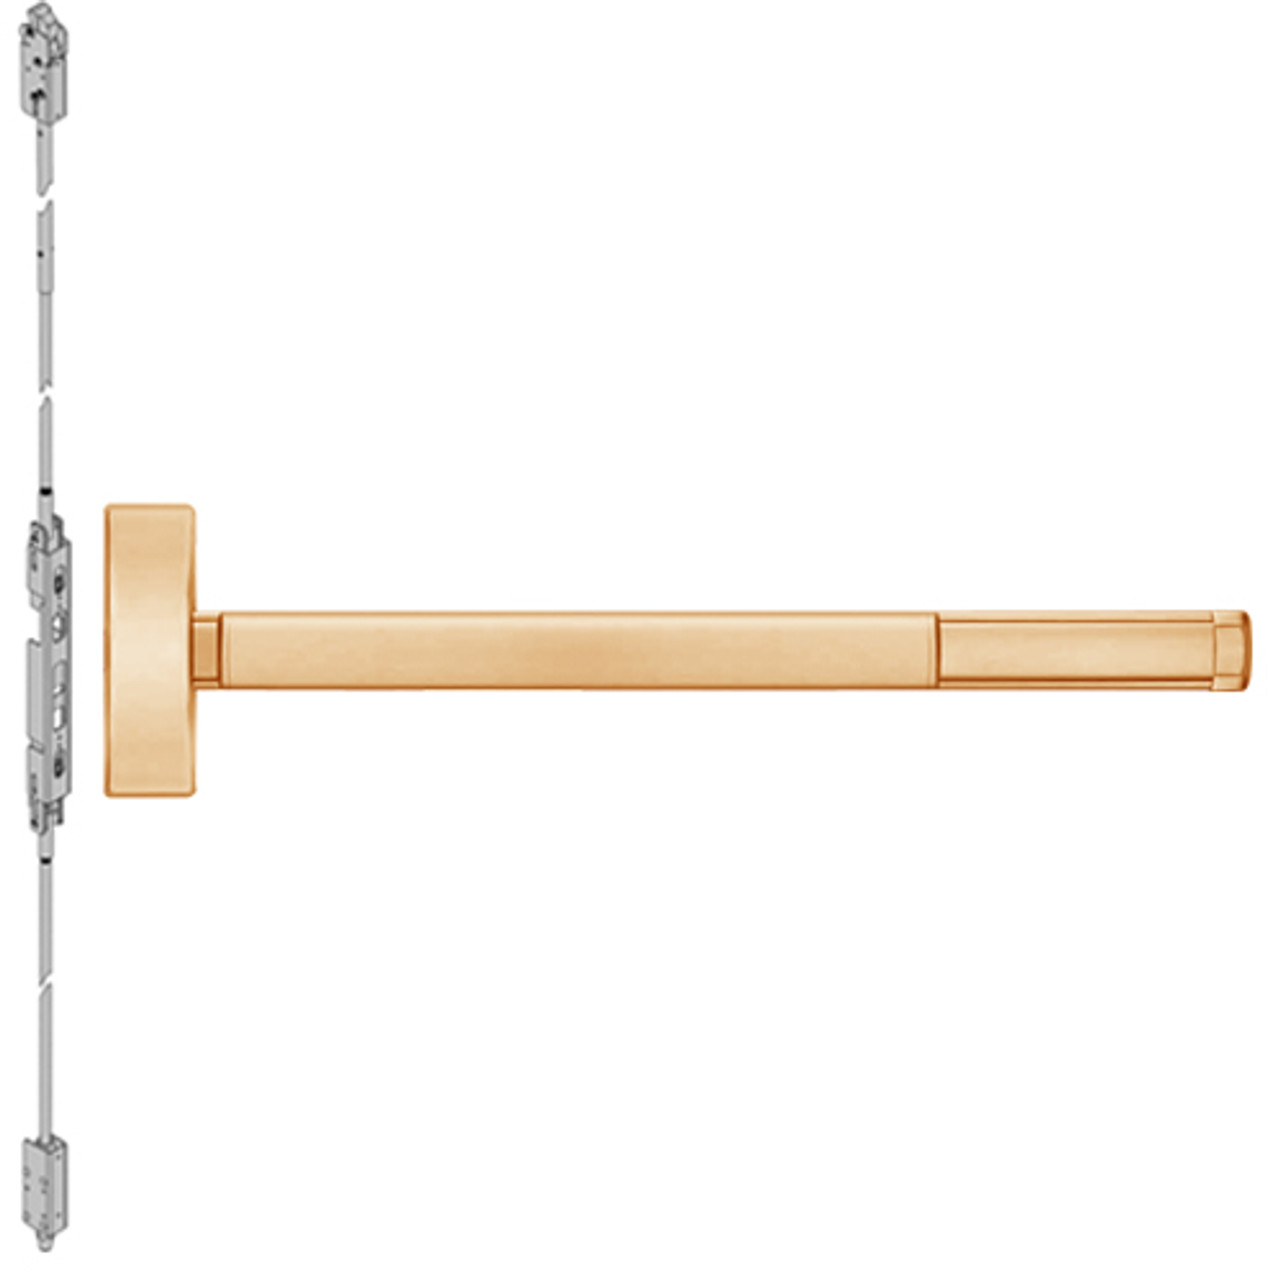 DE2803LBR-612-48 PHI 2800 Series Concealed Vertical Rod Exit Device with Delayed Egress Prepped for Key Retracts Latchbolt in Satin Bronze Finish